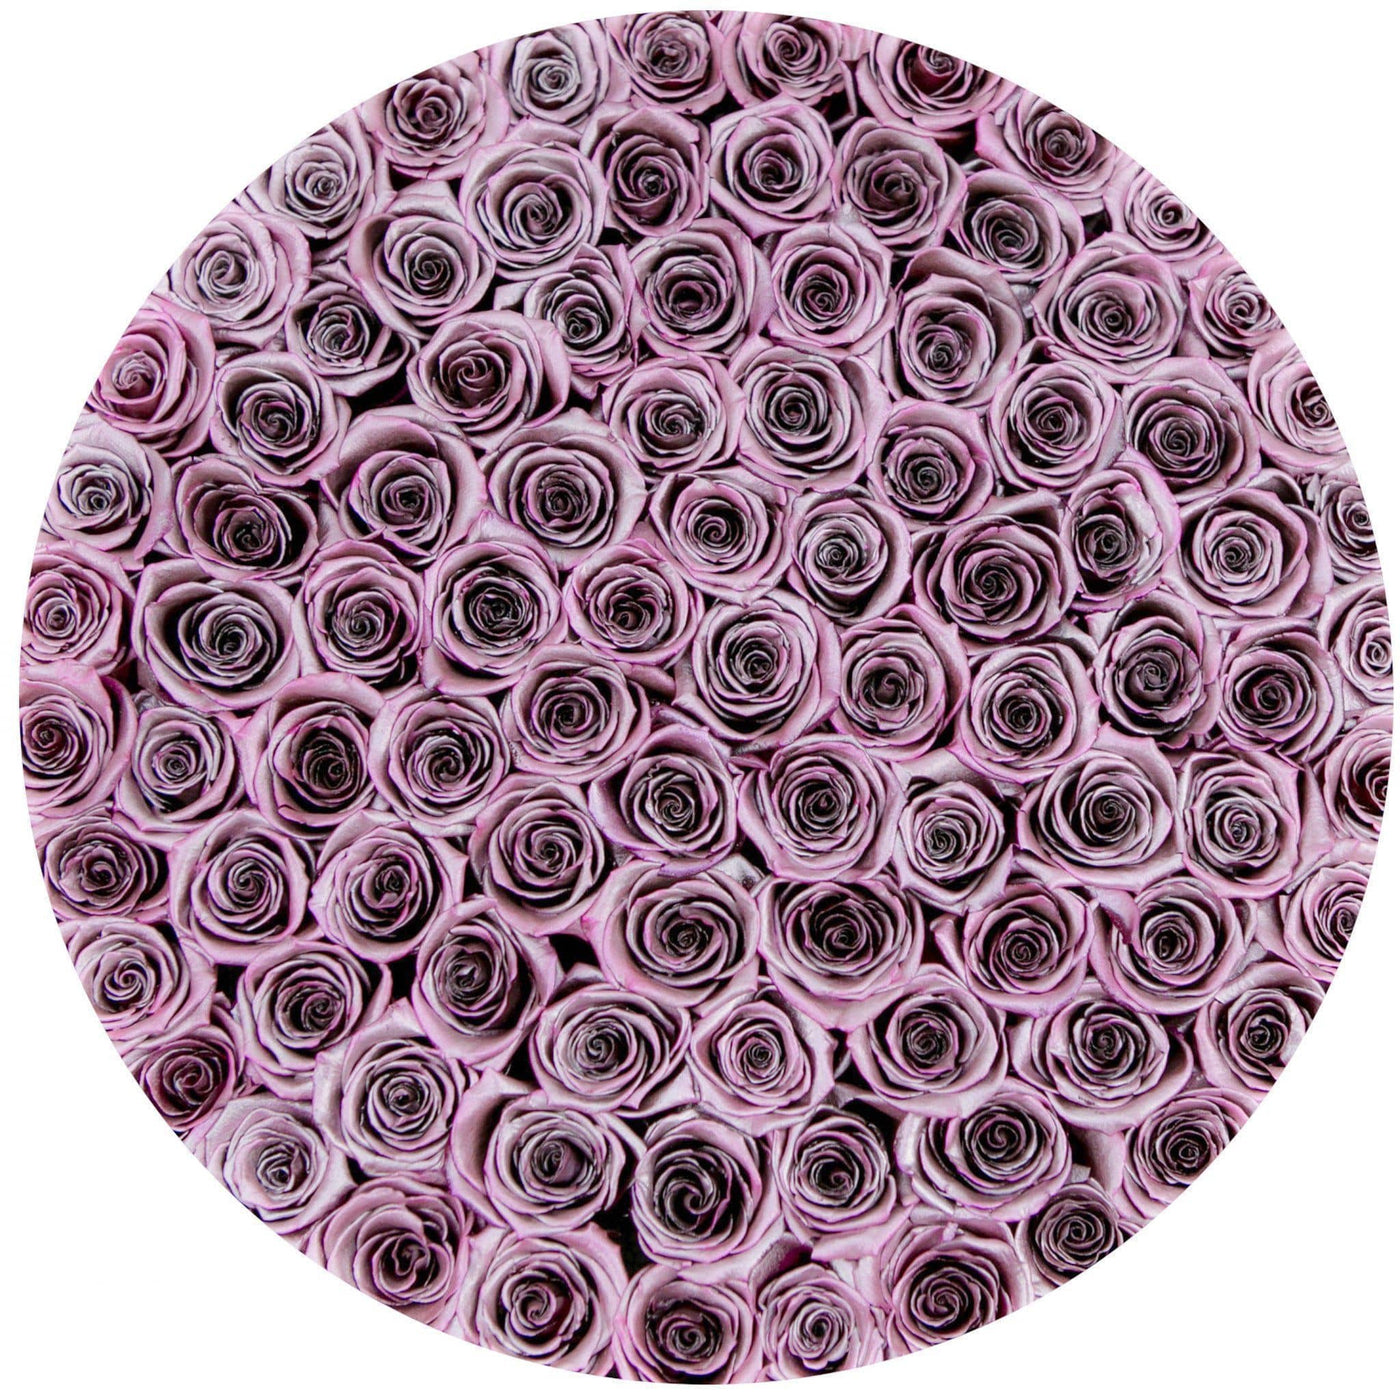 Metallic Pink Roses That Last A Year - Deluxe Rose Box